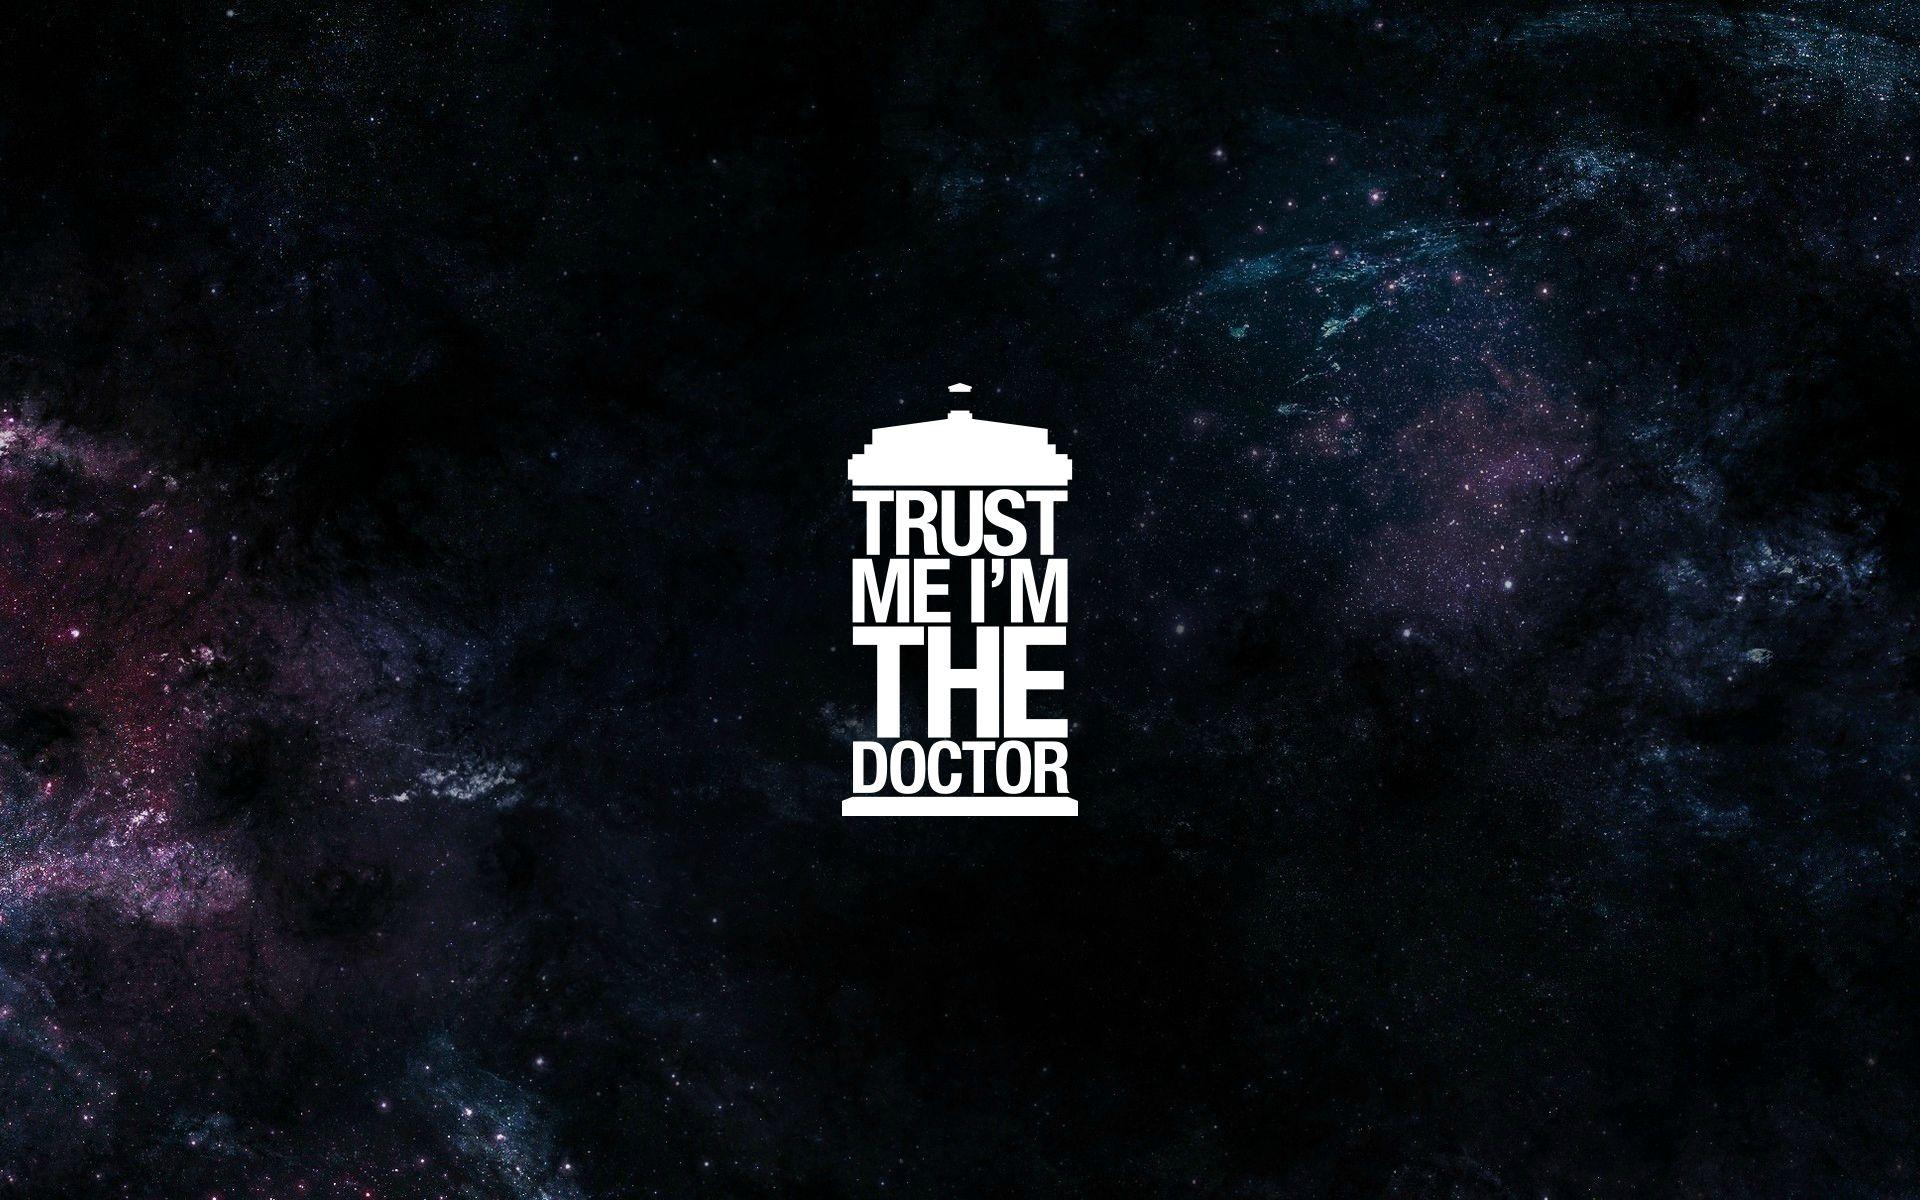 High Definition Collection: Doctor Who Wallpaper, 40 Full HD Doctor